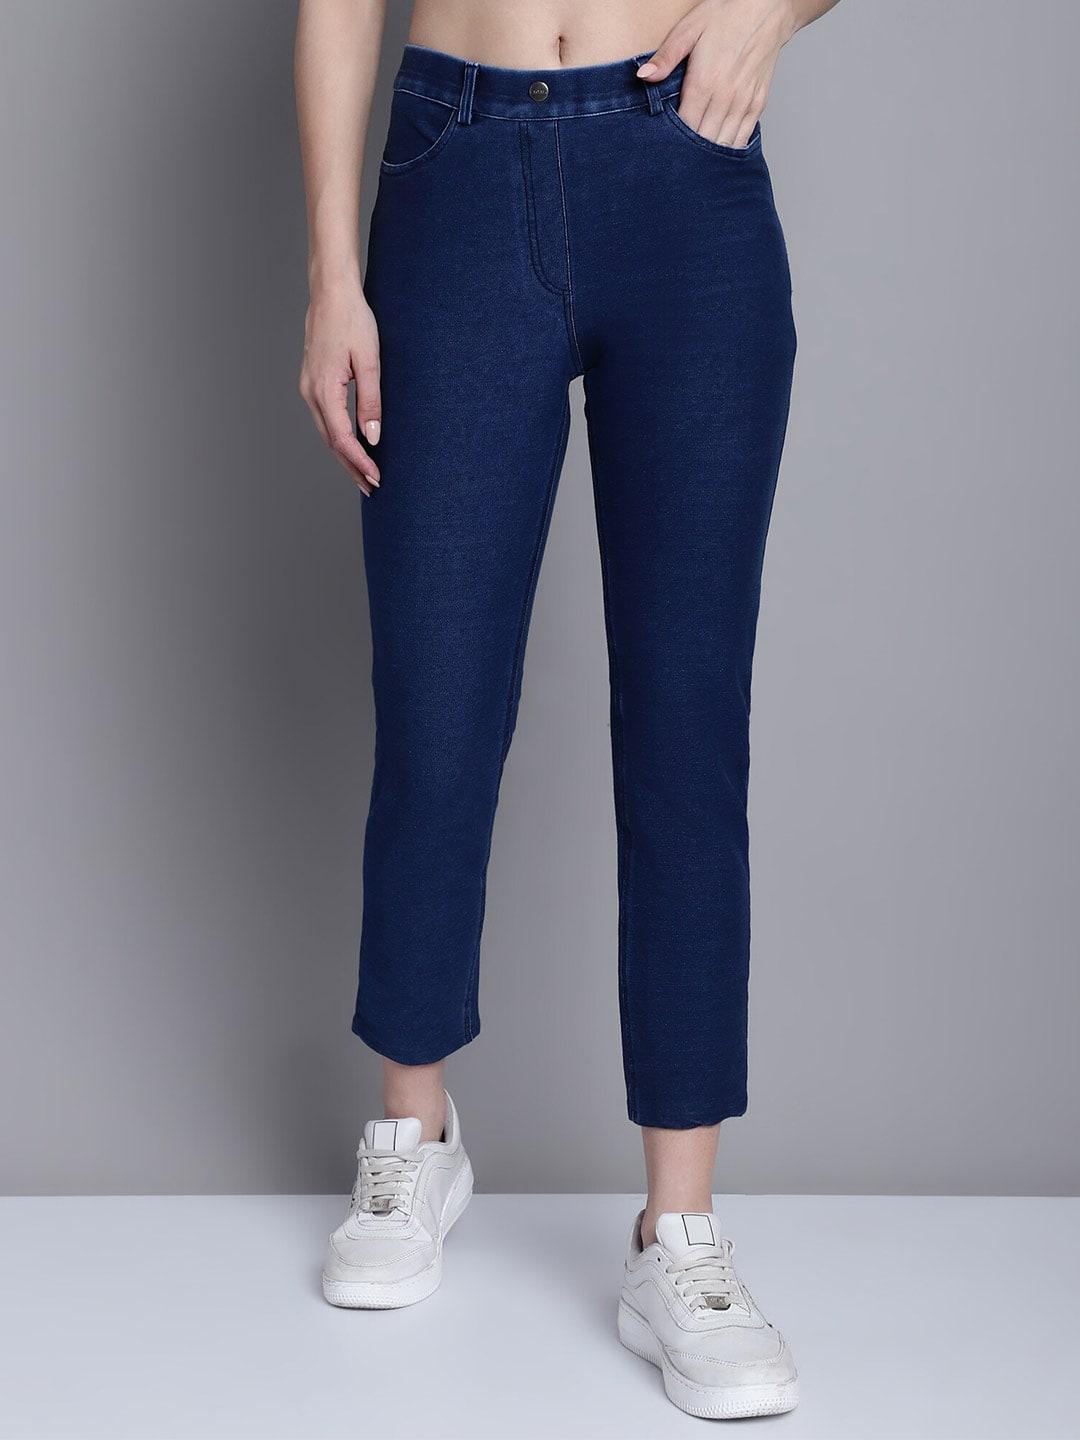 cantabil-women-mid-rise-cotton-jeggings